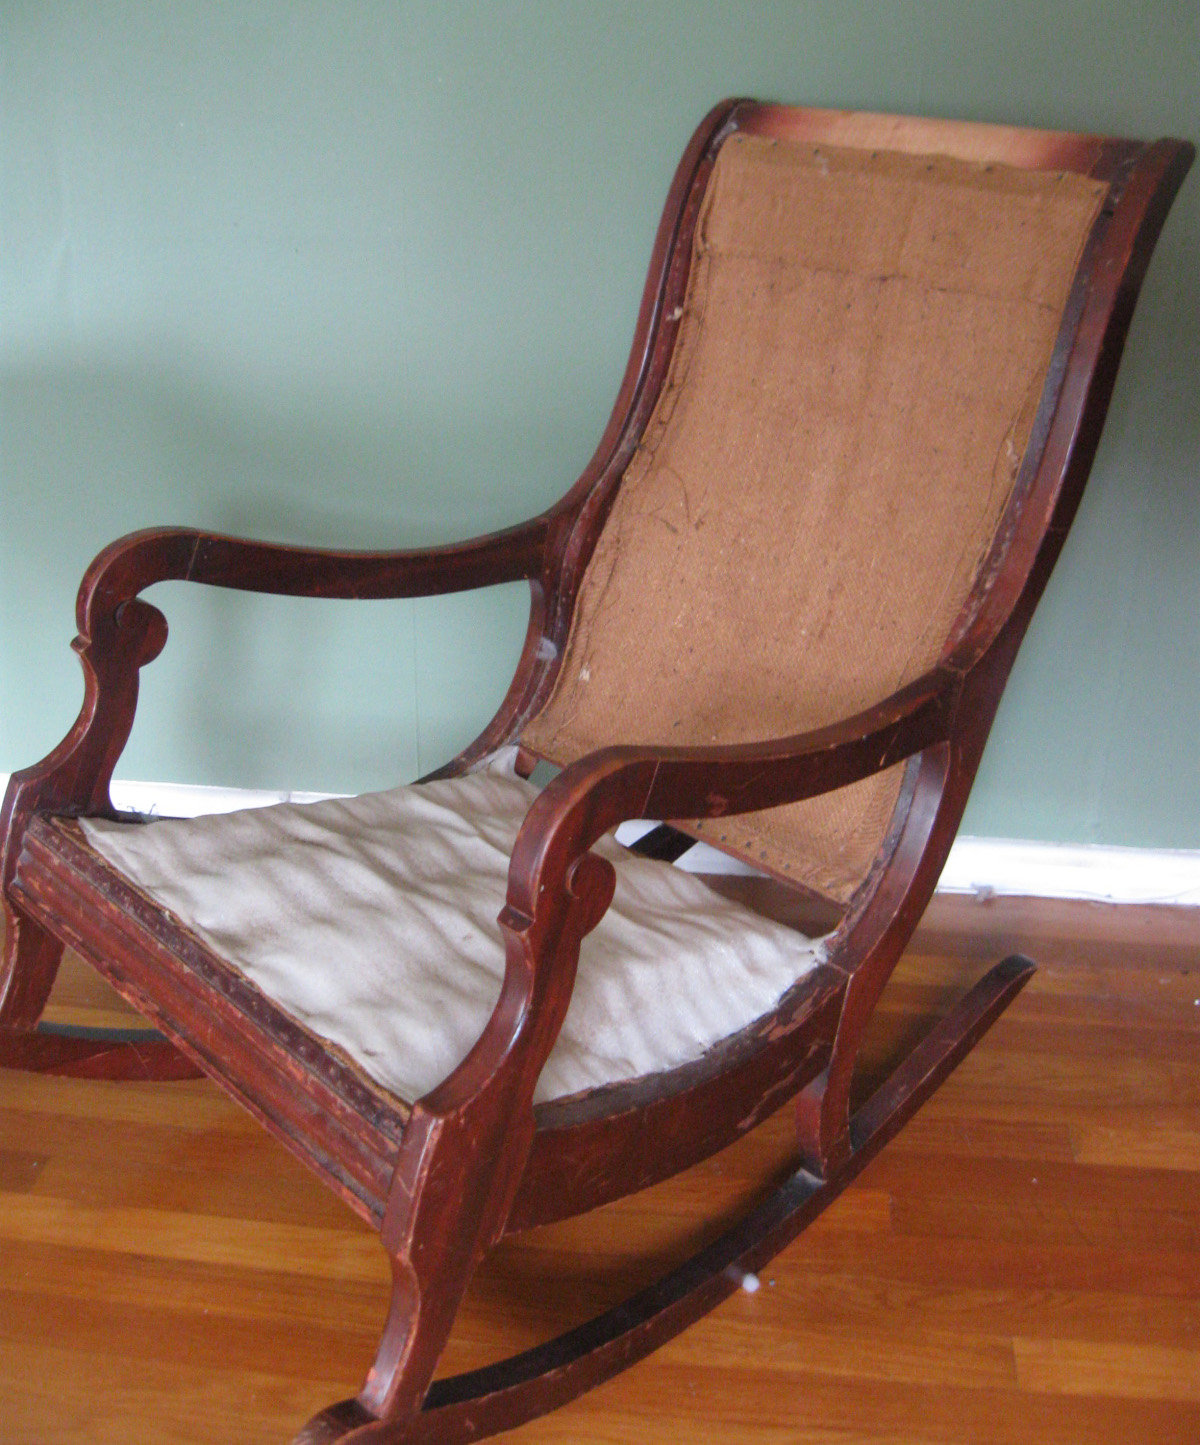 Upholster Paint A Rocking Chair Part 1 Prodigal Pieces